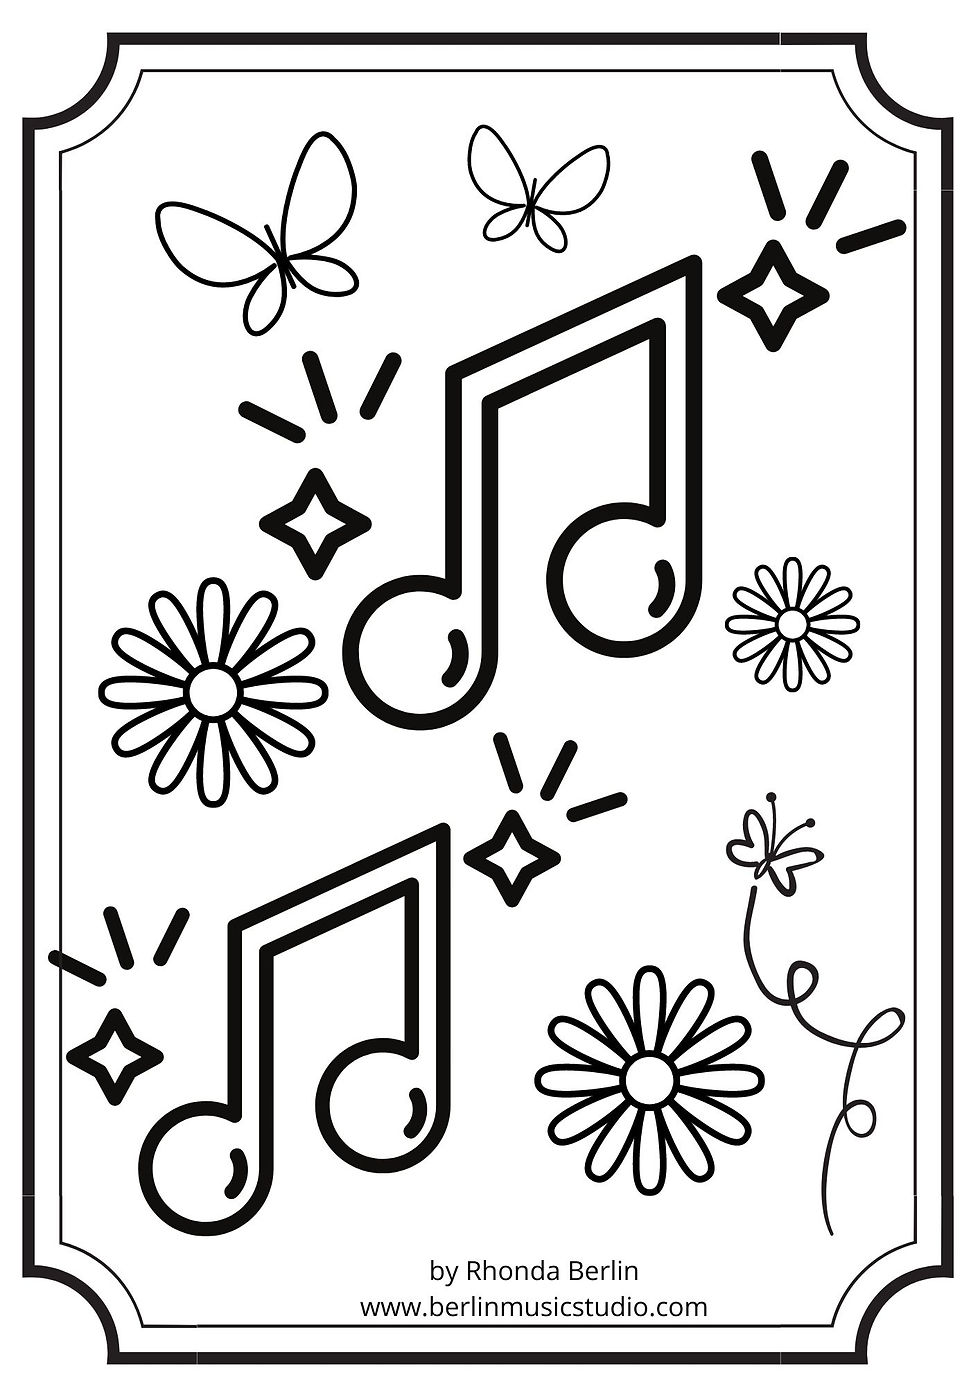 A music coloring book for spring